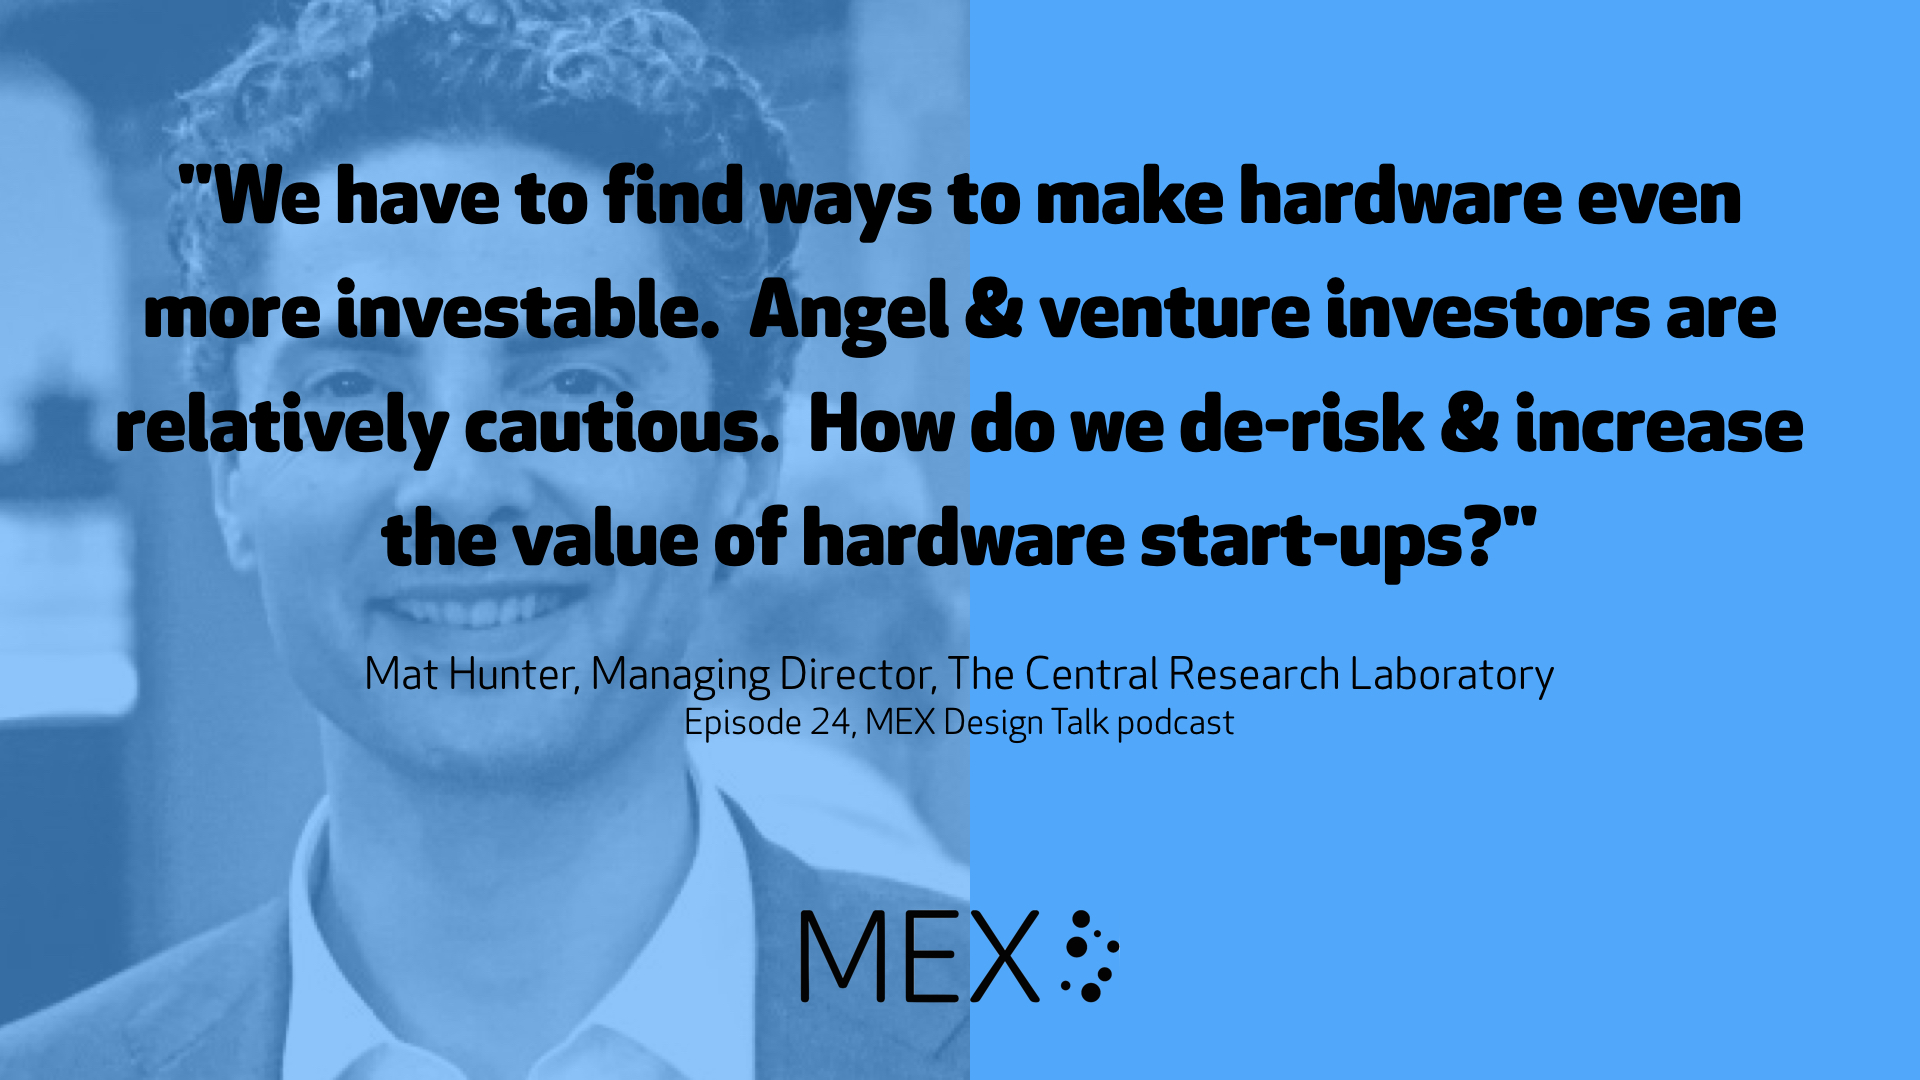 "We have to find ways to make hardware even more investable. Angel & venture investors are relatively cautious. How do we de-risk & increase the value of hardware start-ups?" Mat Hunter, Managing Director, The Central Research Laboratory Episode 24, MEX Design Talk podcast